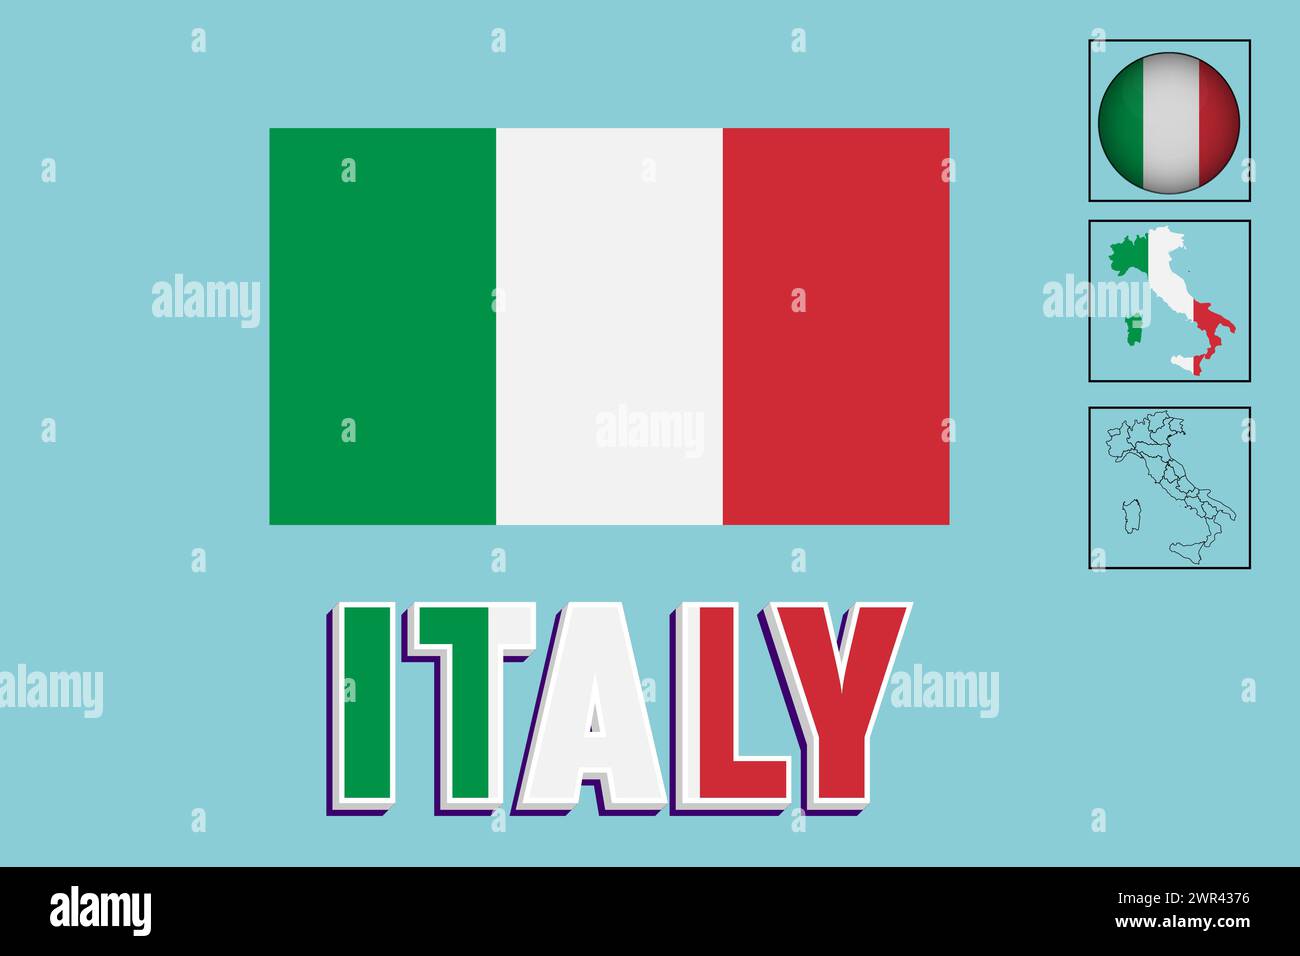 Italy flag and map in vector illustration Stock Vector